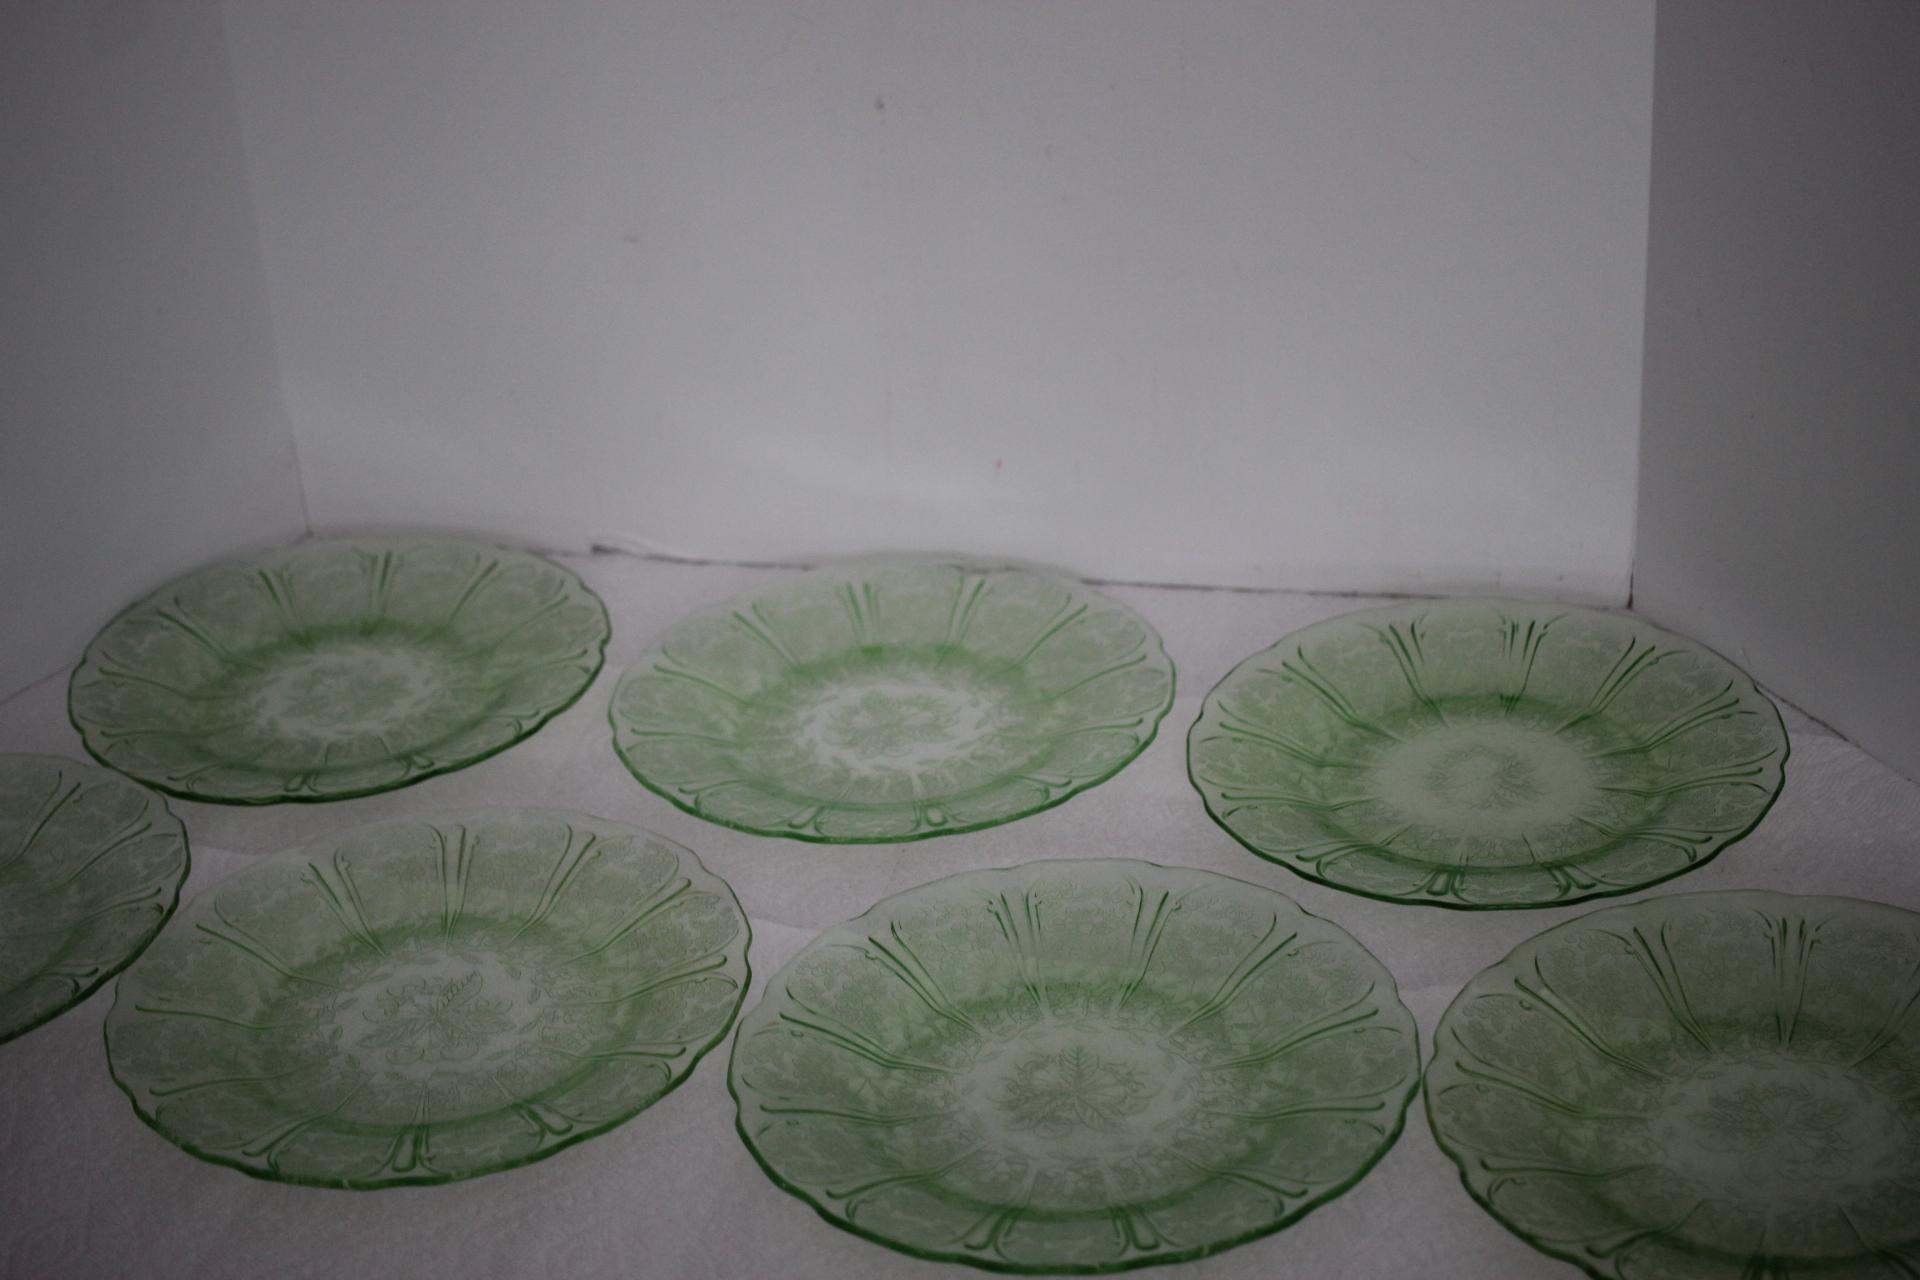 Set of 7 Green Depression Glass Plates, Cherry Blossoms, Jeanette, 9" round